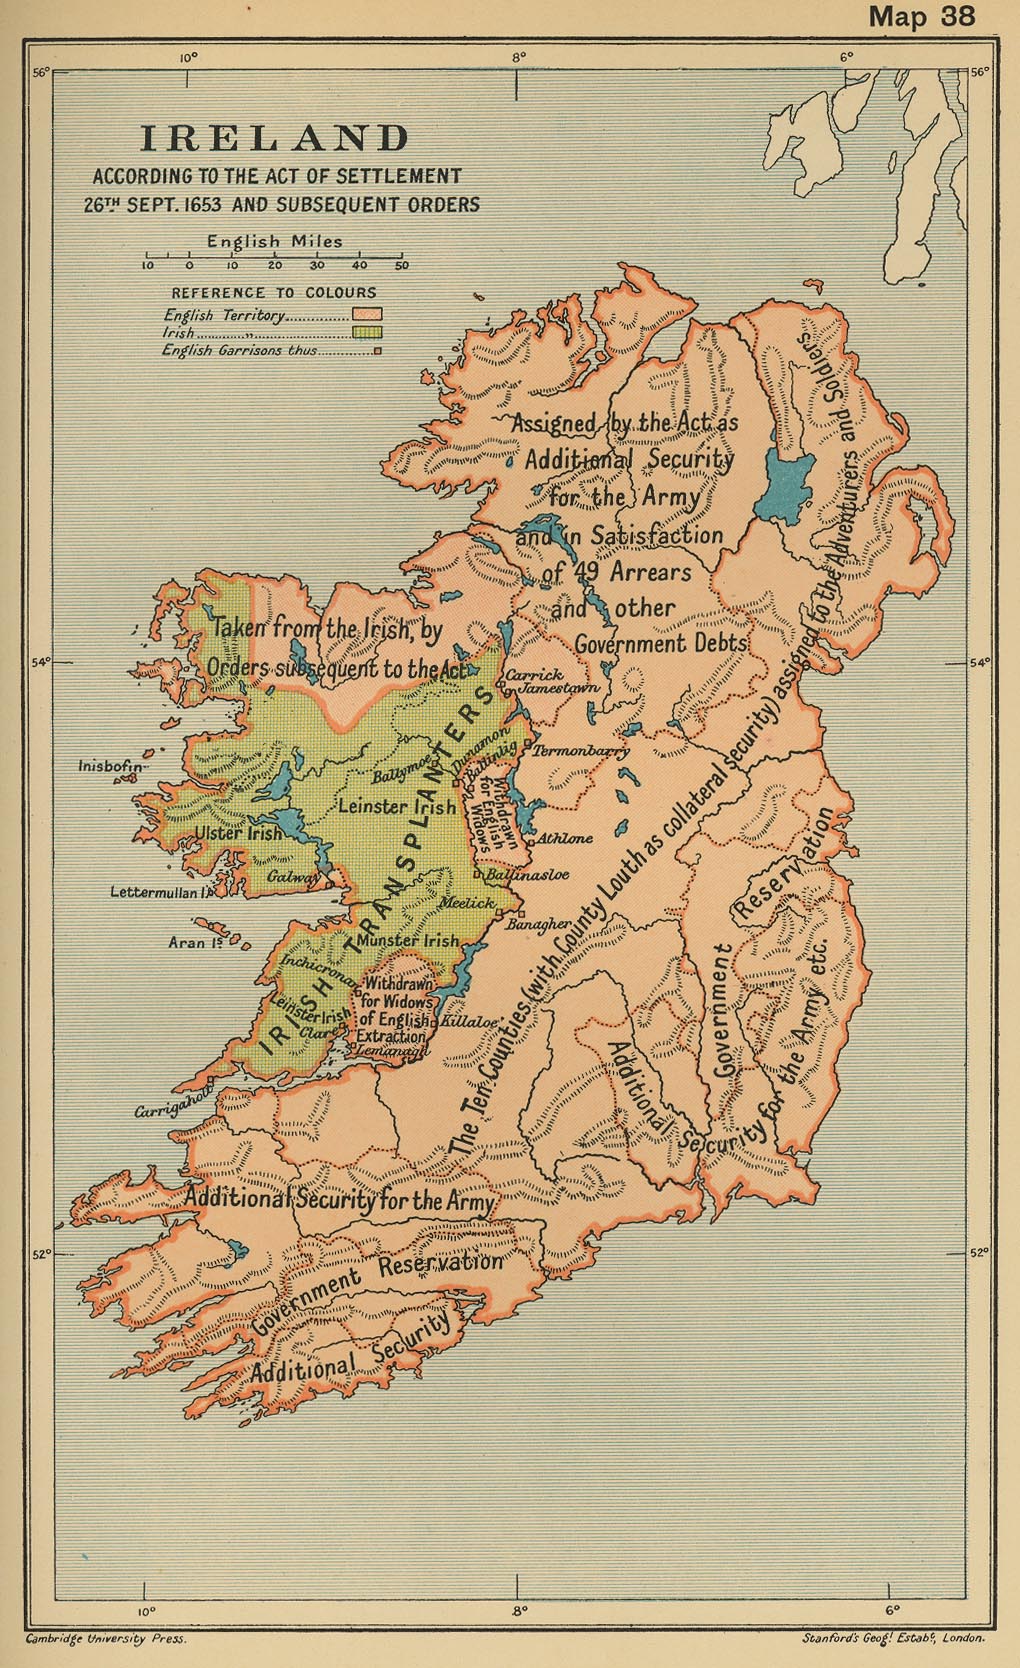 Map of Ireland According to the Act of Settlement September 26, 1653 and Subsequent Orders